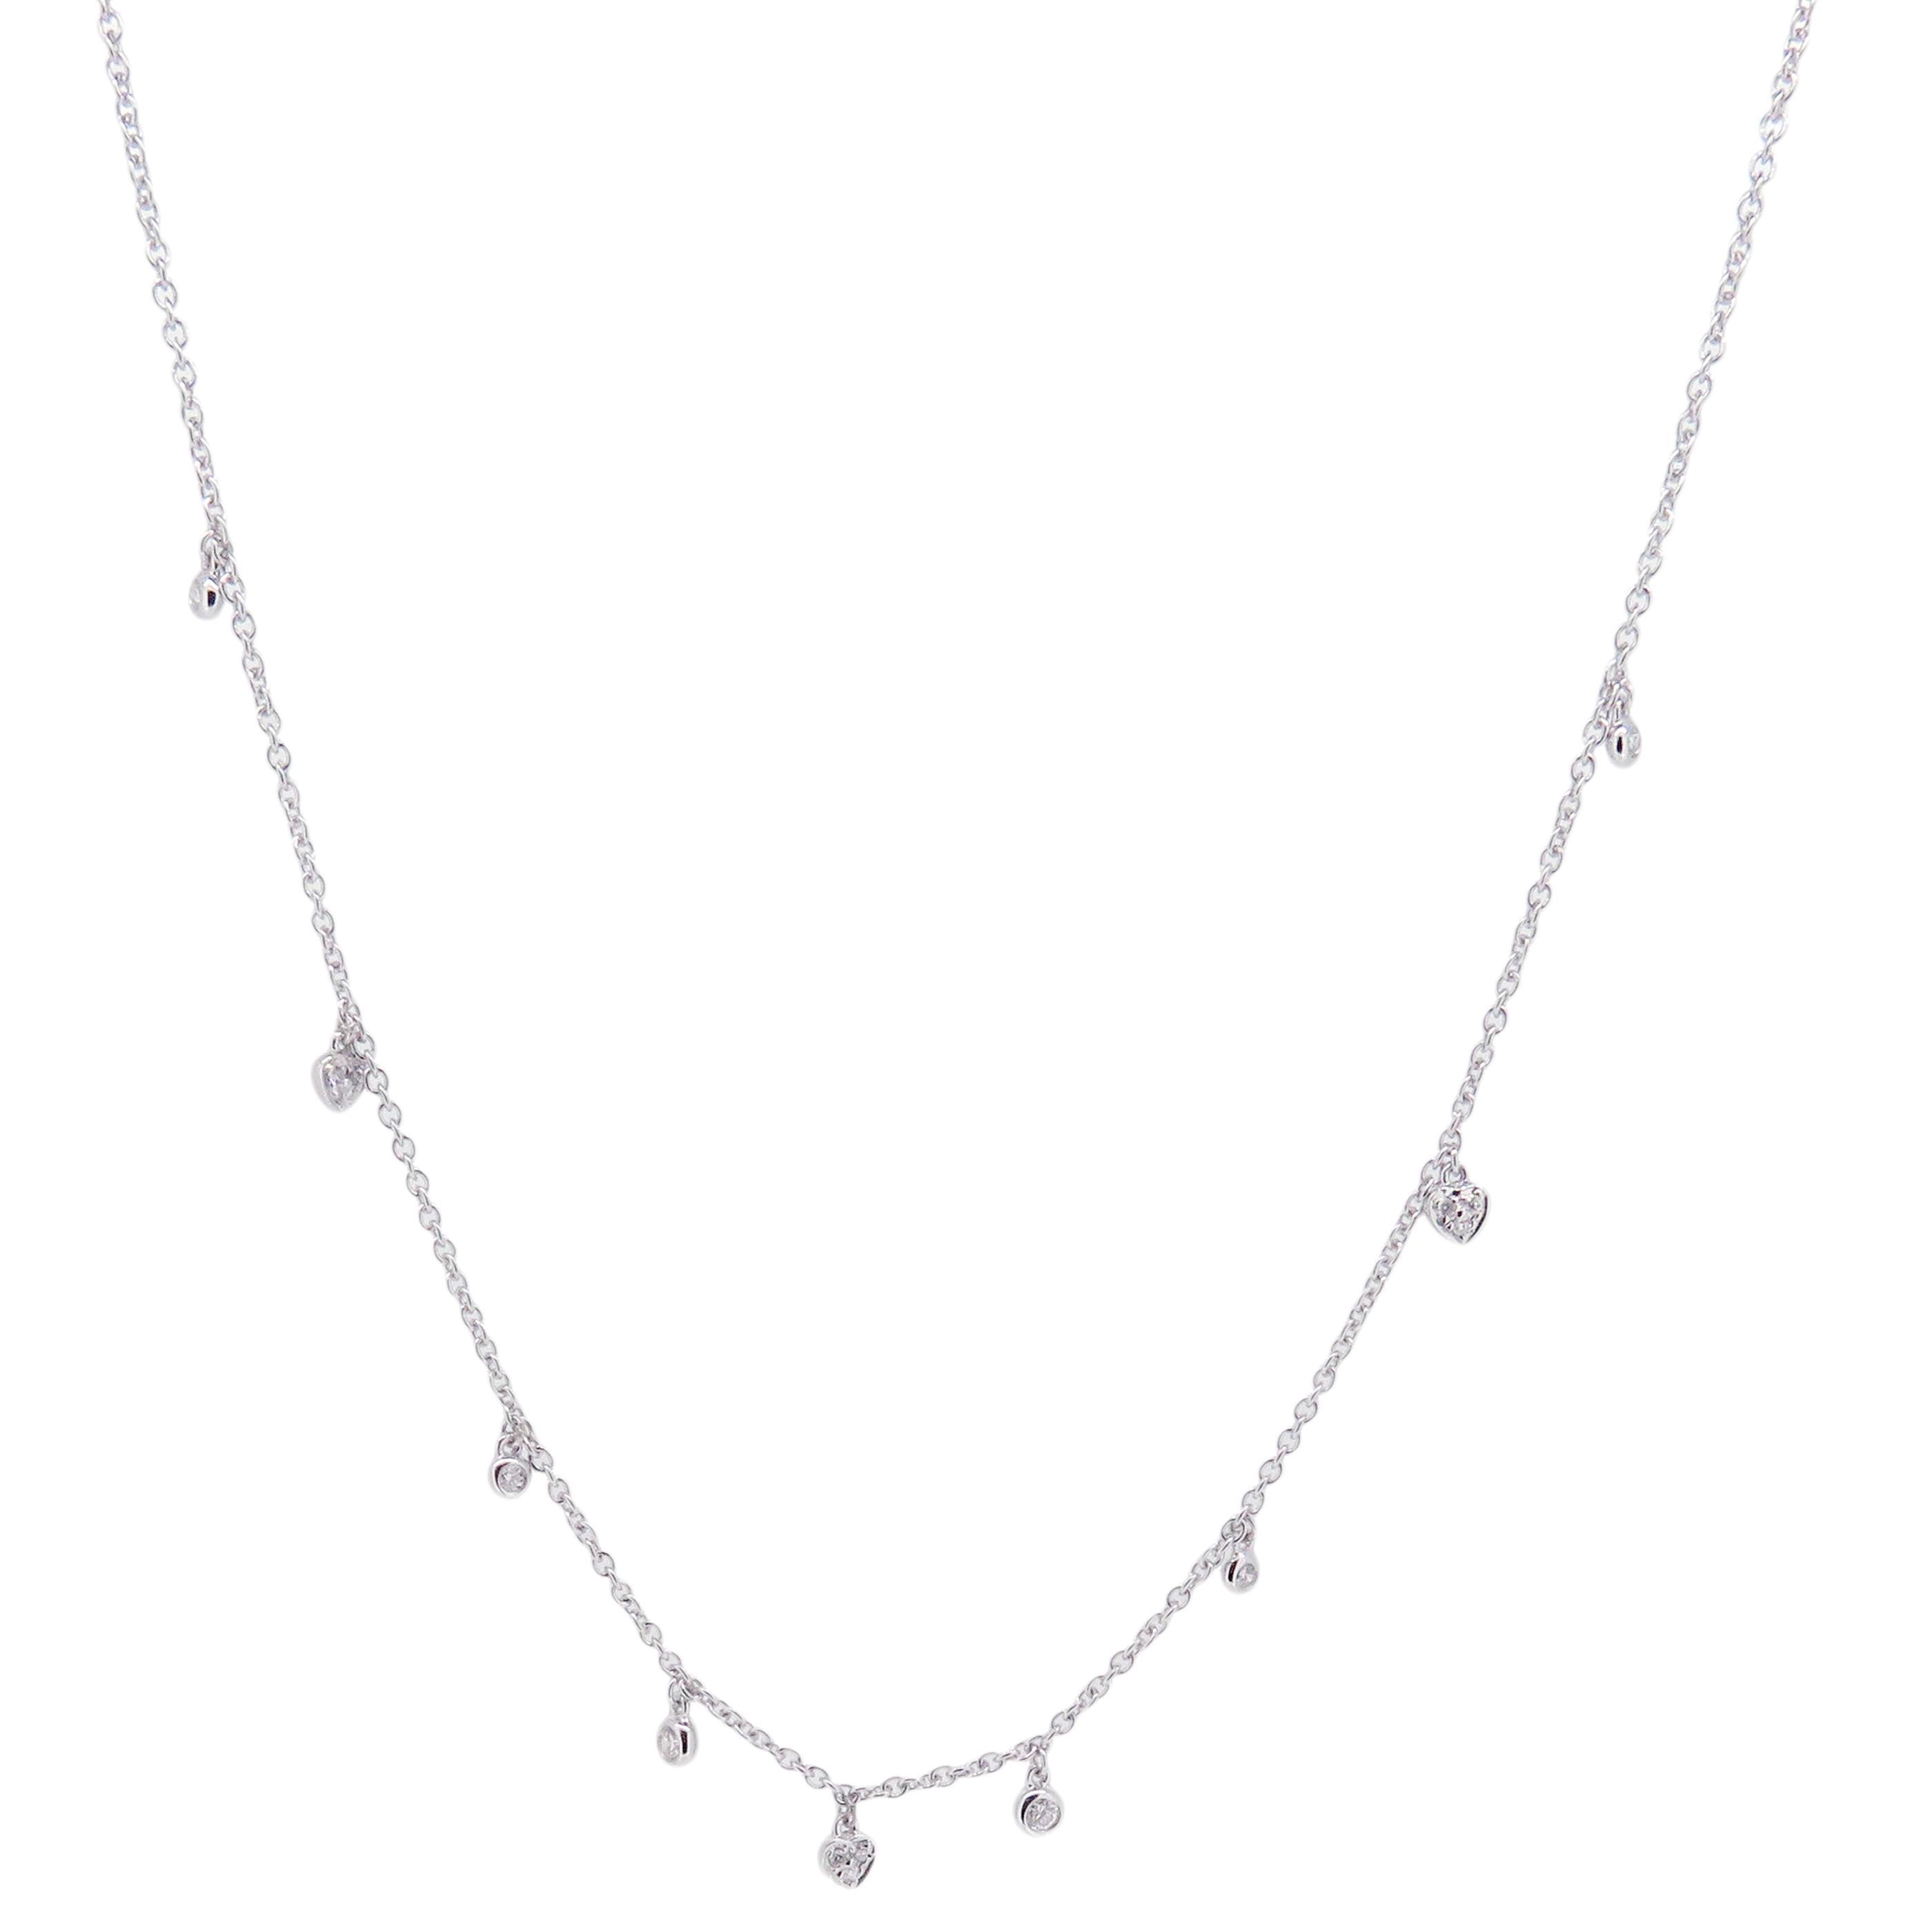 This delicate necklace is crafted in 18-karat white gold, weighing approximately 0.11 total carats of SI-H Quality white diamonds. 

Necklace is 16